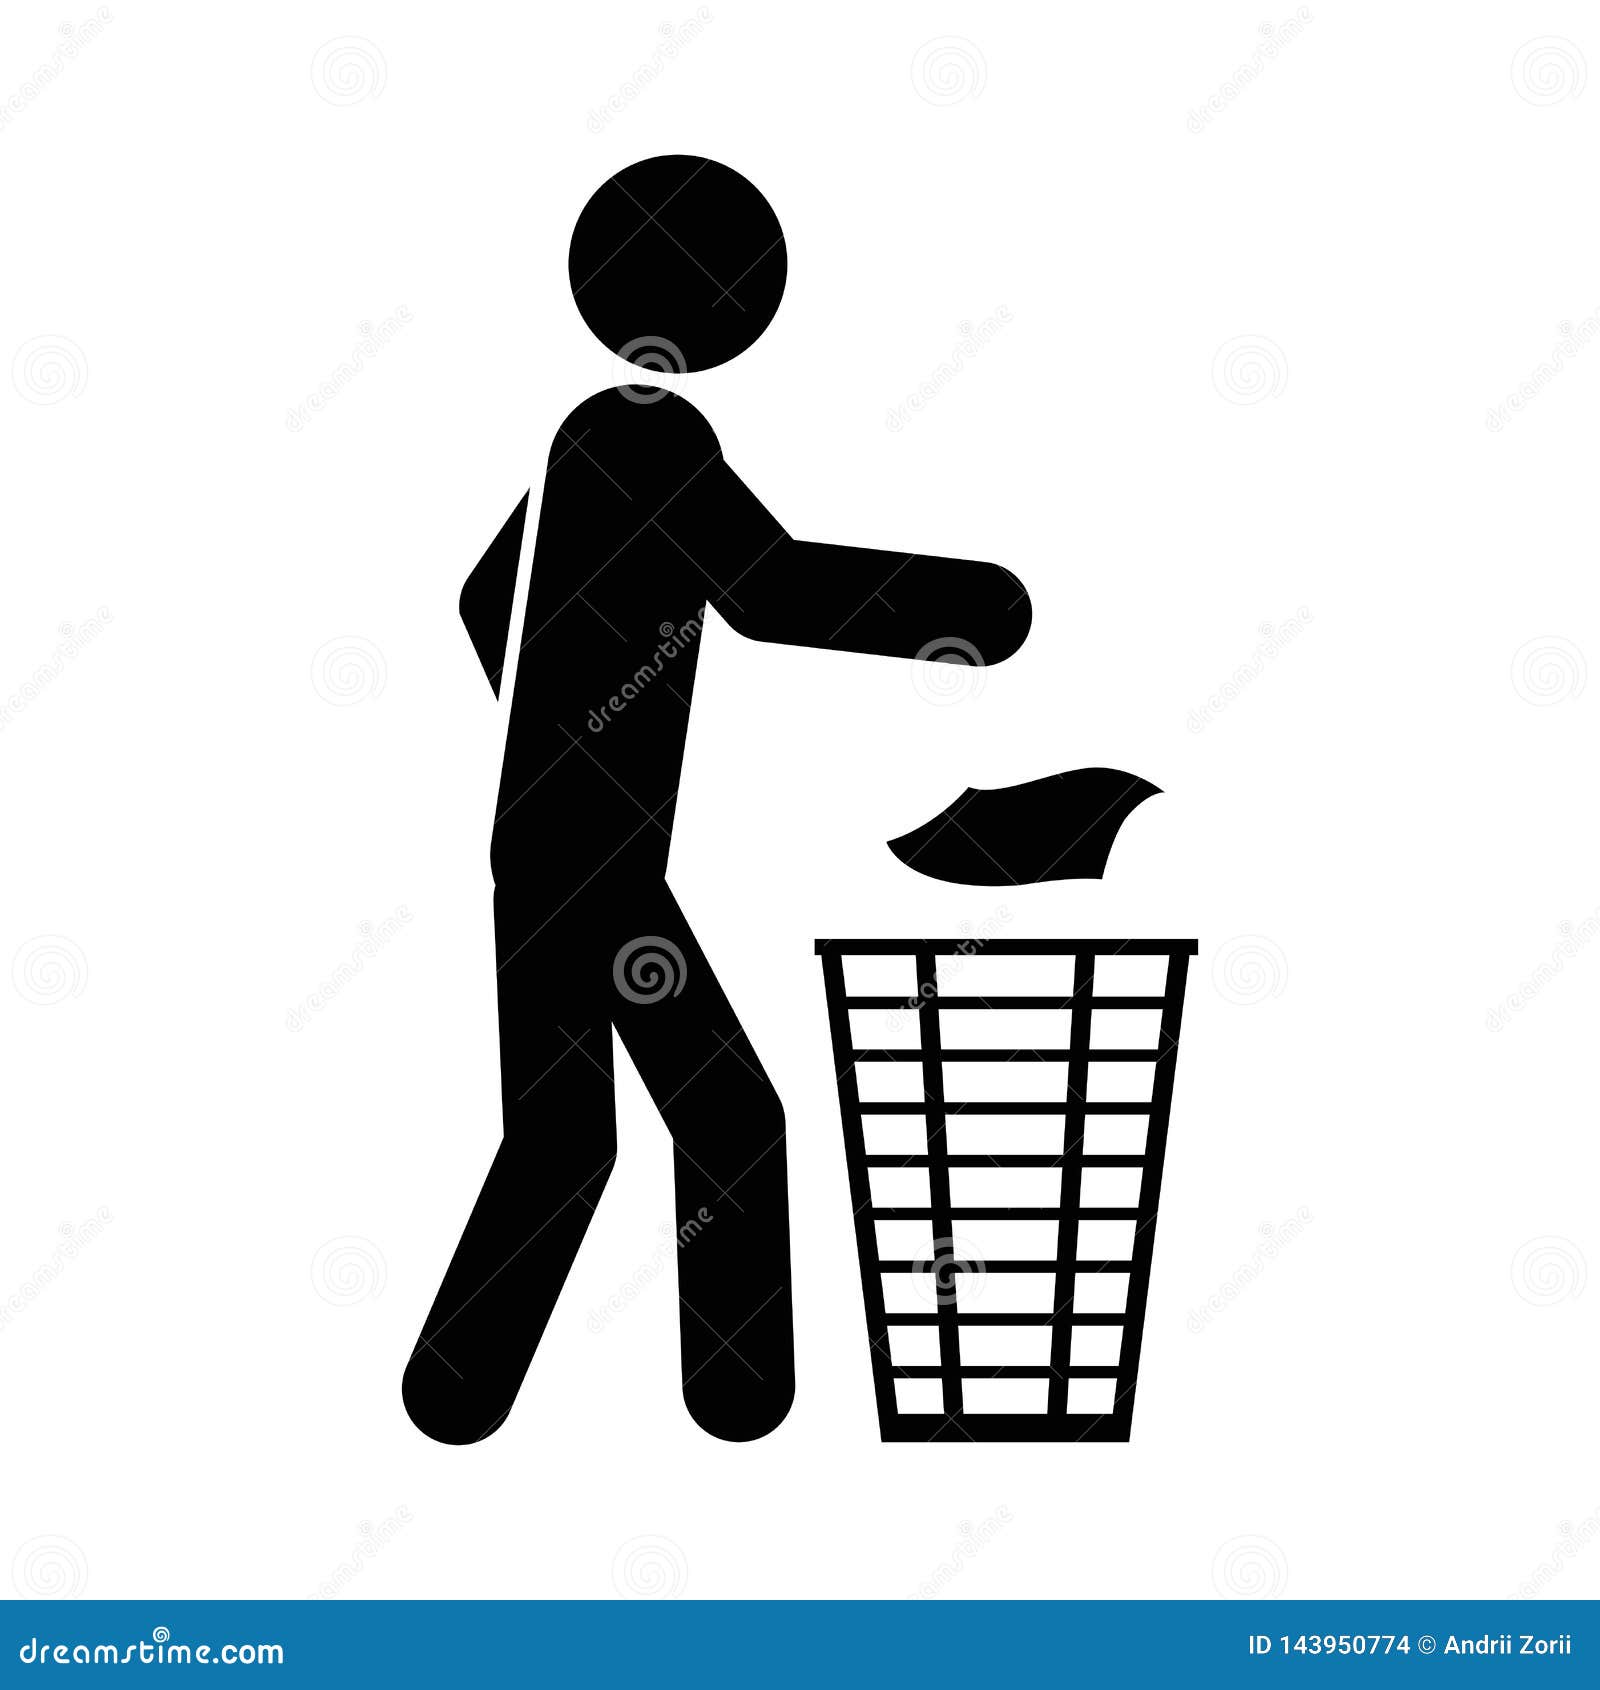 A Sign Of A Man Throwing Garbage In The Urn A Man Throws Rubbish Into The Urn Vector Illustration Stock Vector Illustration Of Conservation Dustbin 143950774